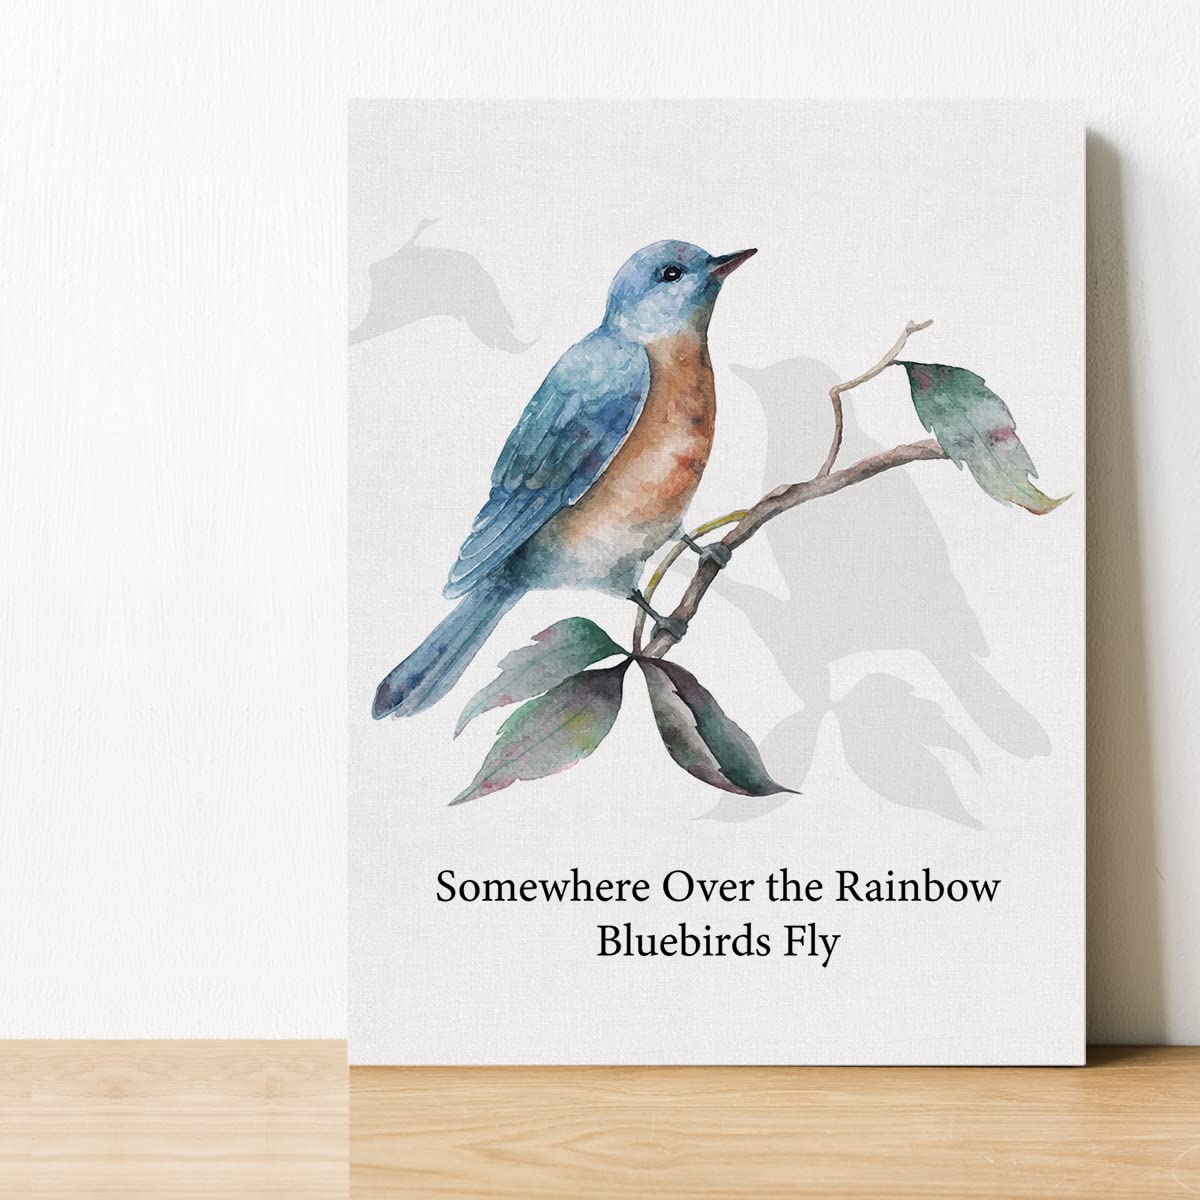 EVXID Inspirational Quote Somewhere Over the Rainbow Canvas Poster Painting Wall Art, Bluebirds Print Artwork Framed Ready to Hang for Home Office Decor 12 x 15 inch